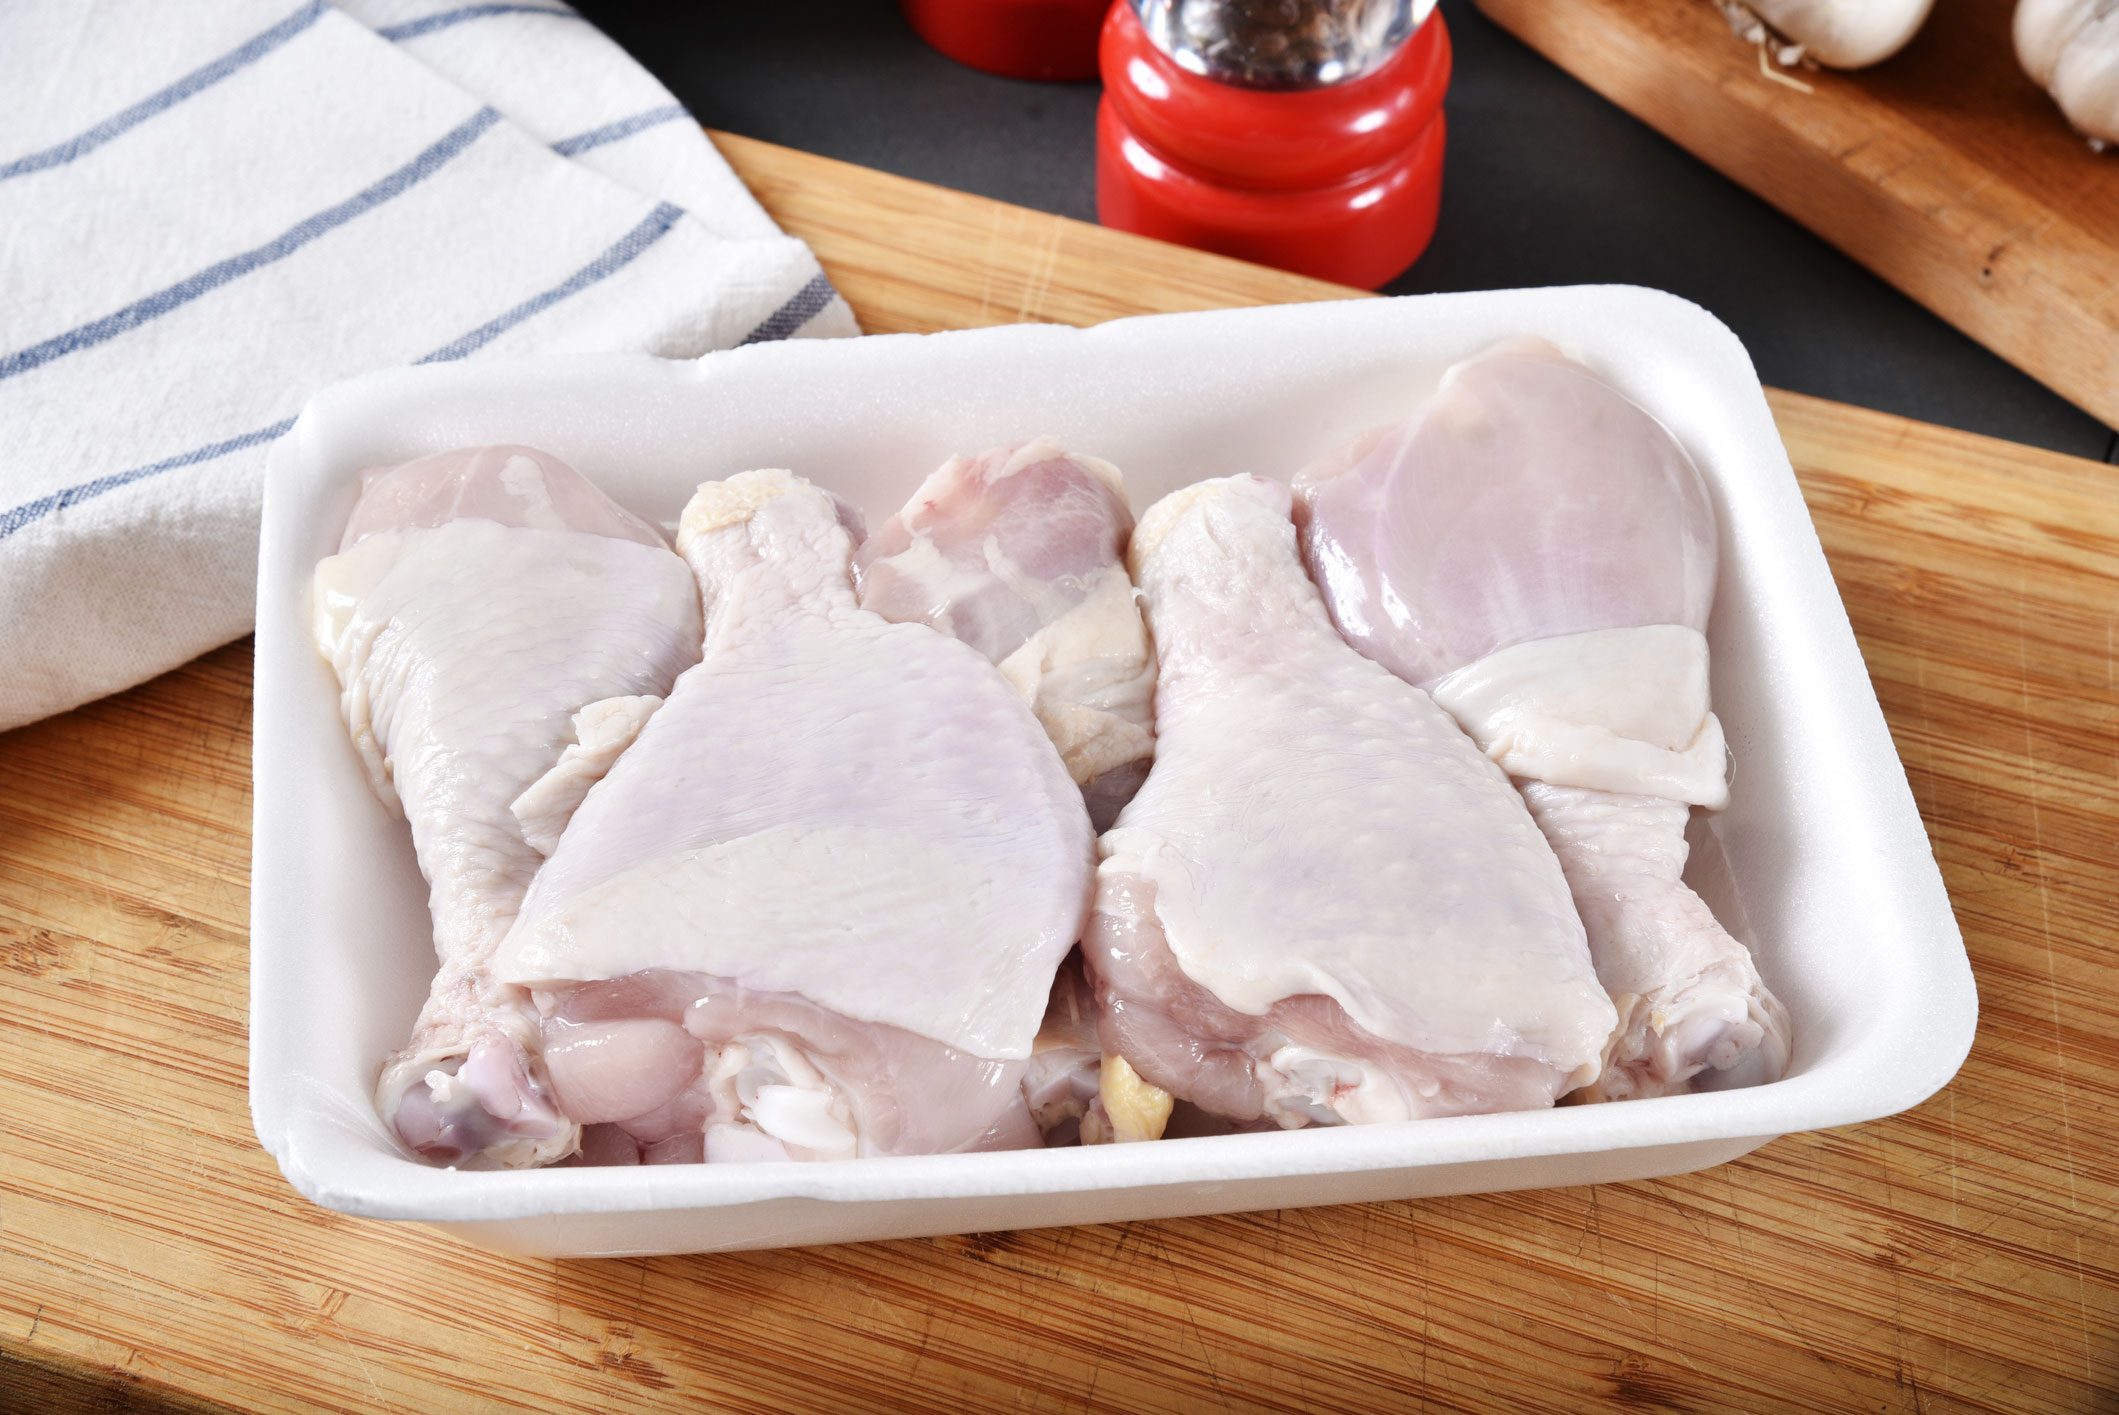 How to Know if Chicken Is Cooked: Temperature, Color & More